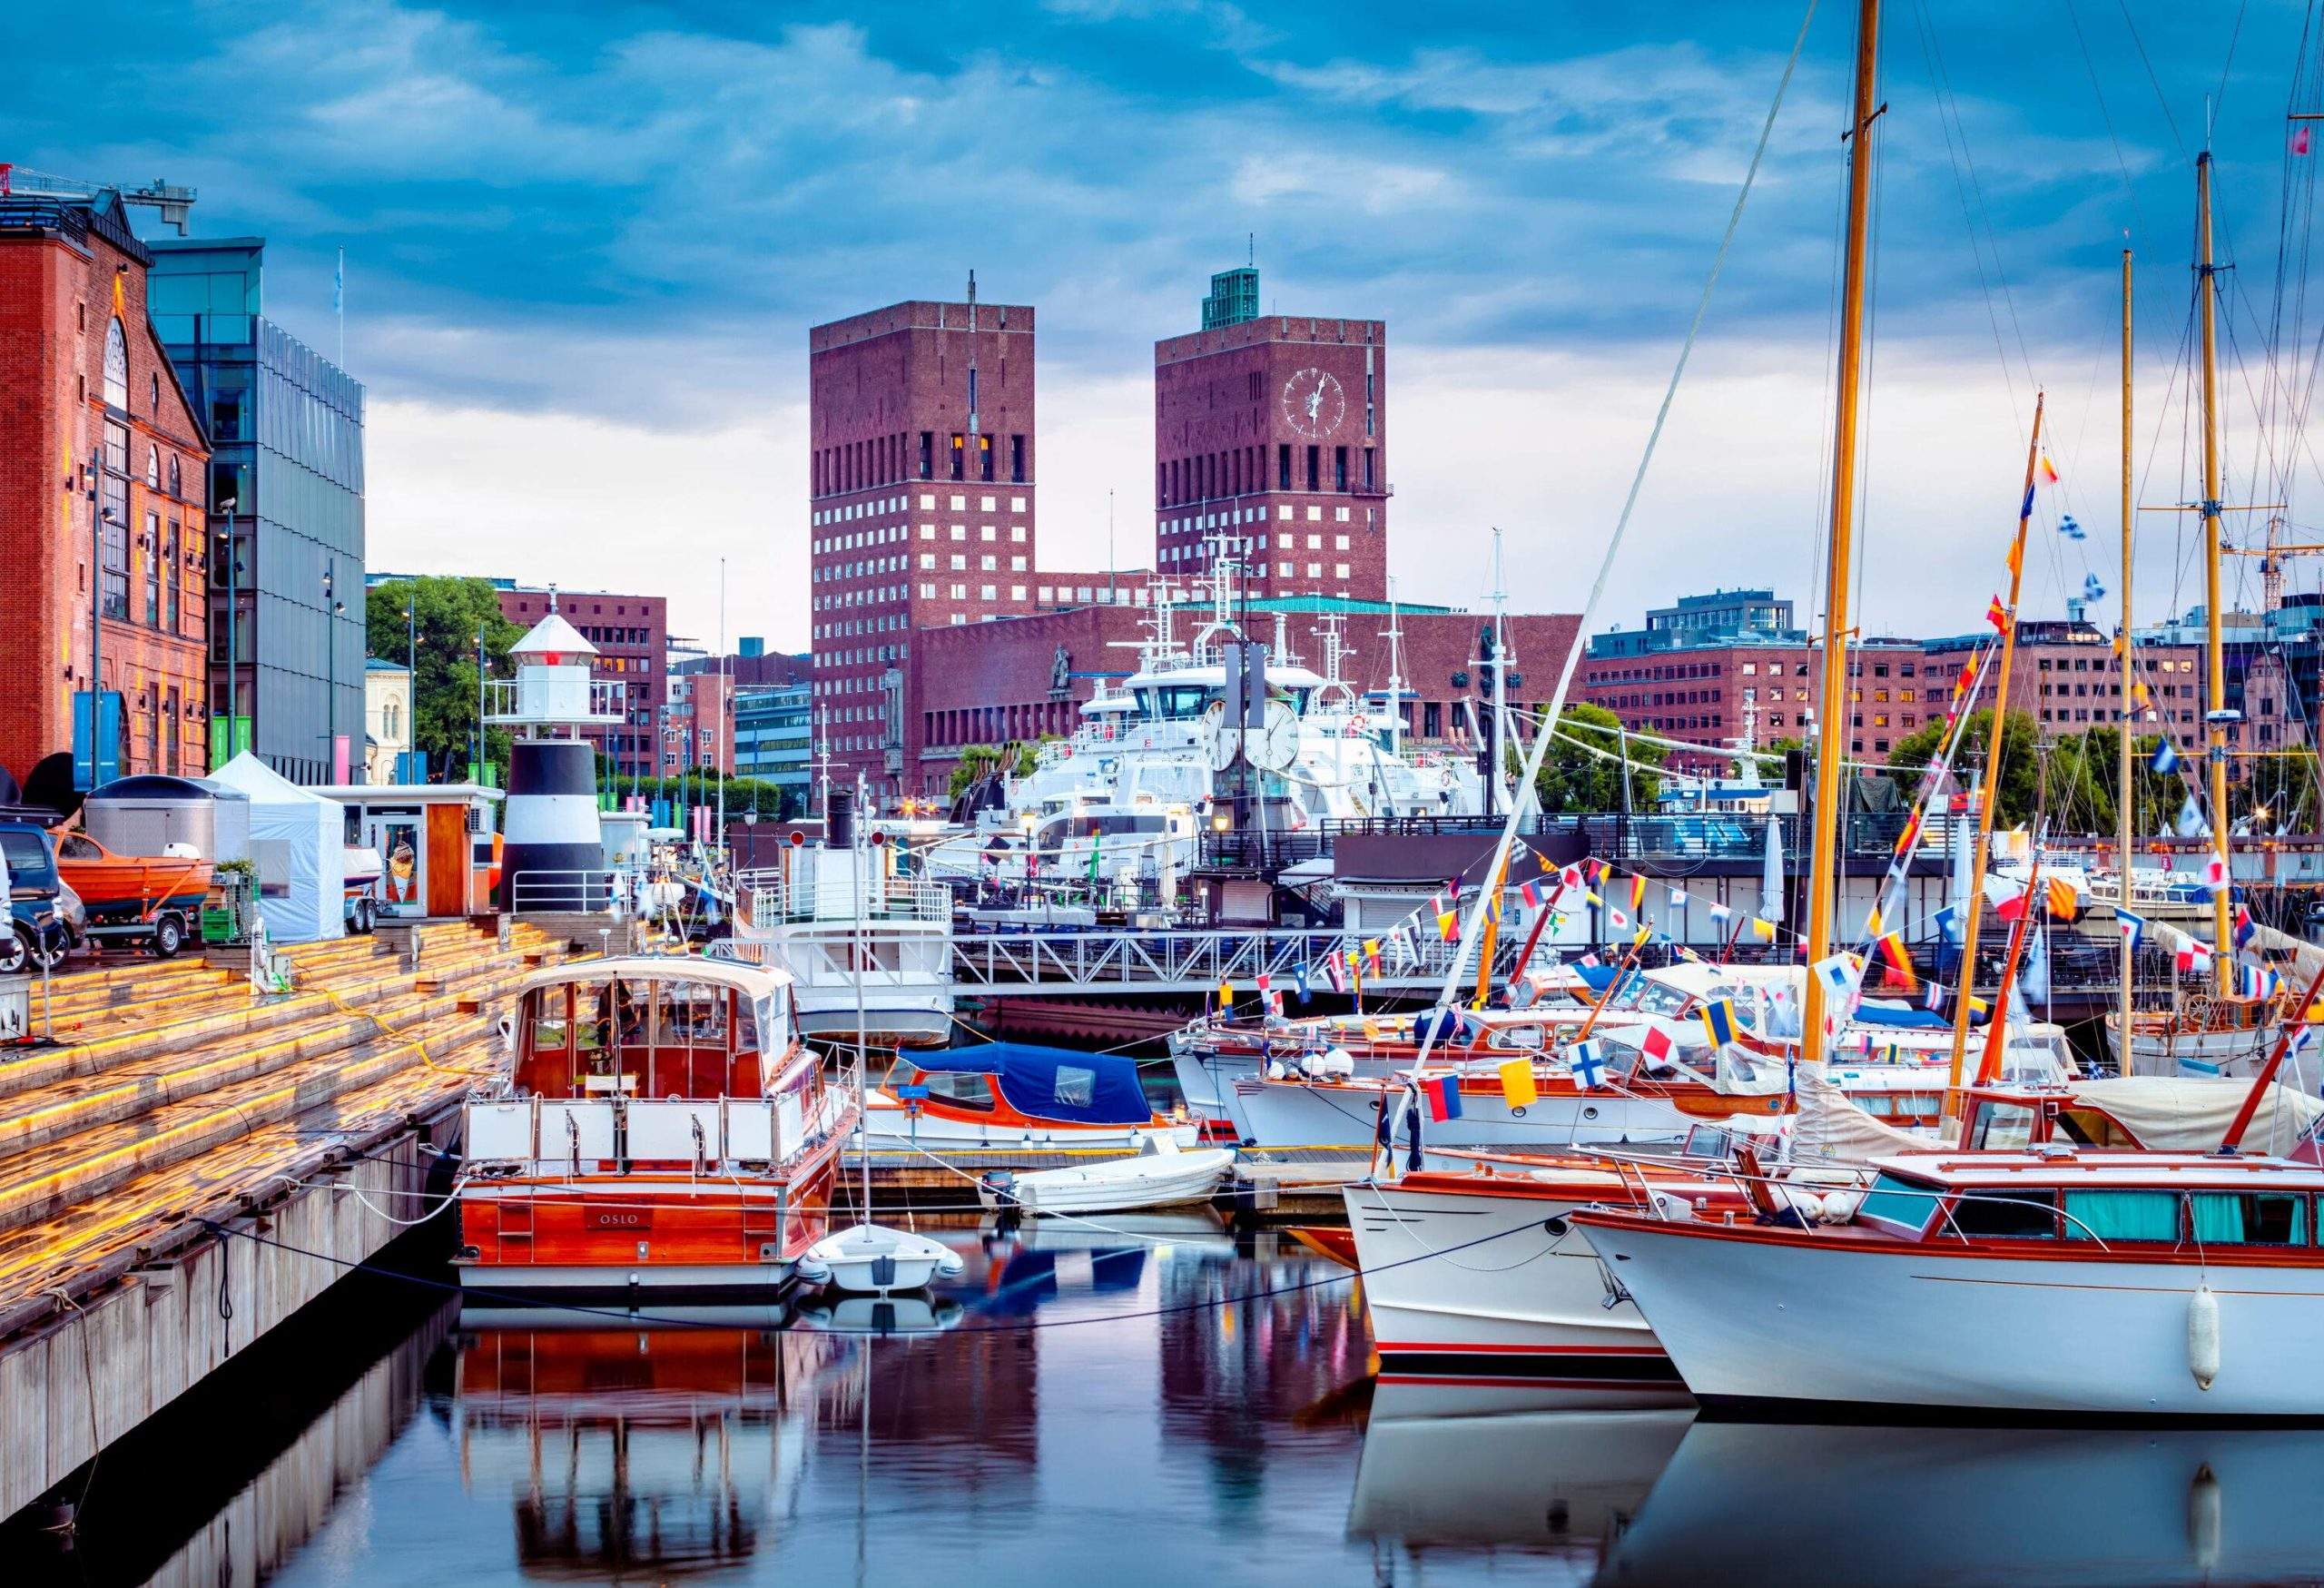 Docked boats with multicoloured flags affixed to their masts crowded into a harbour surrounded by stunning buildings.